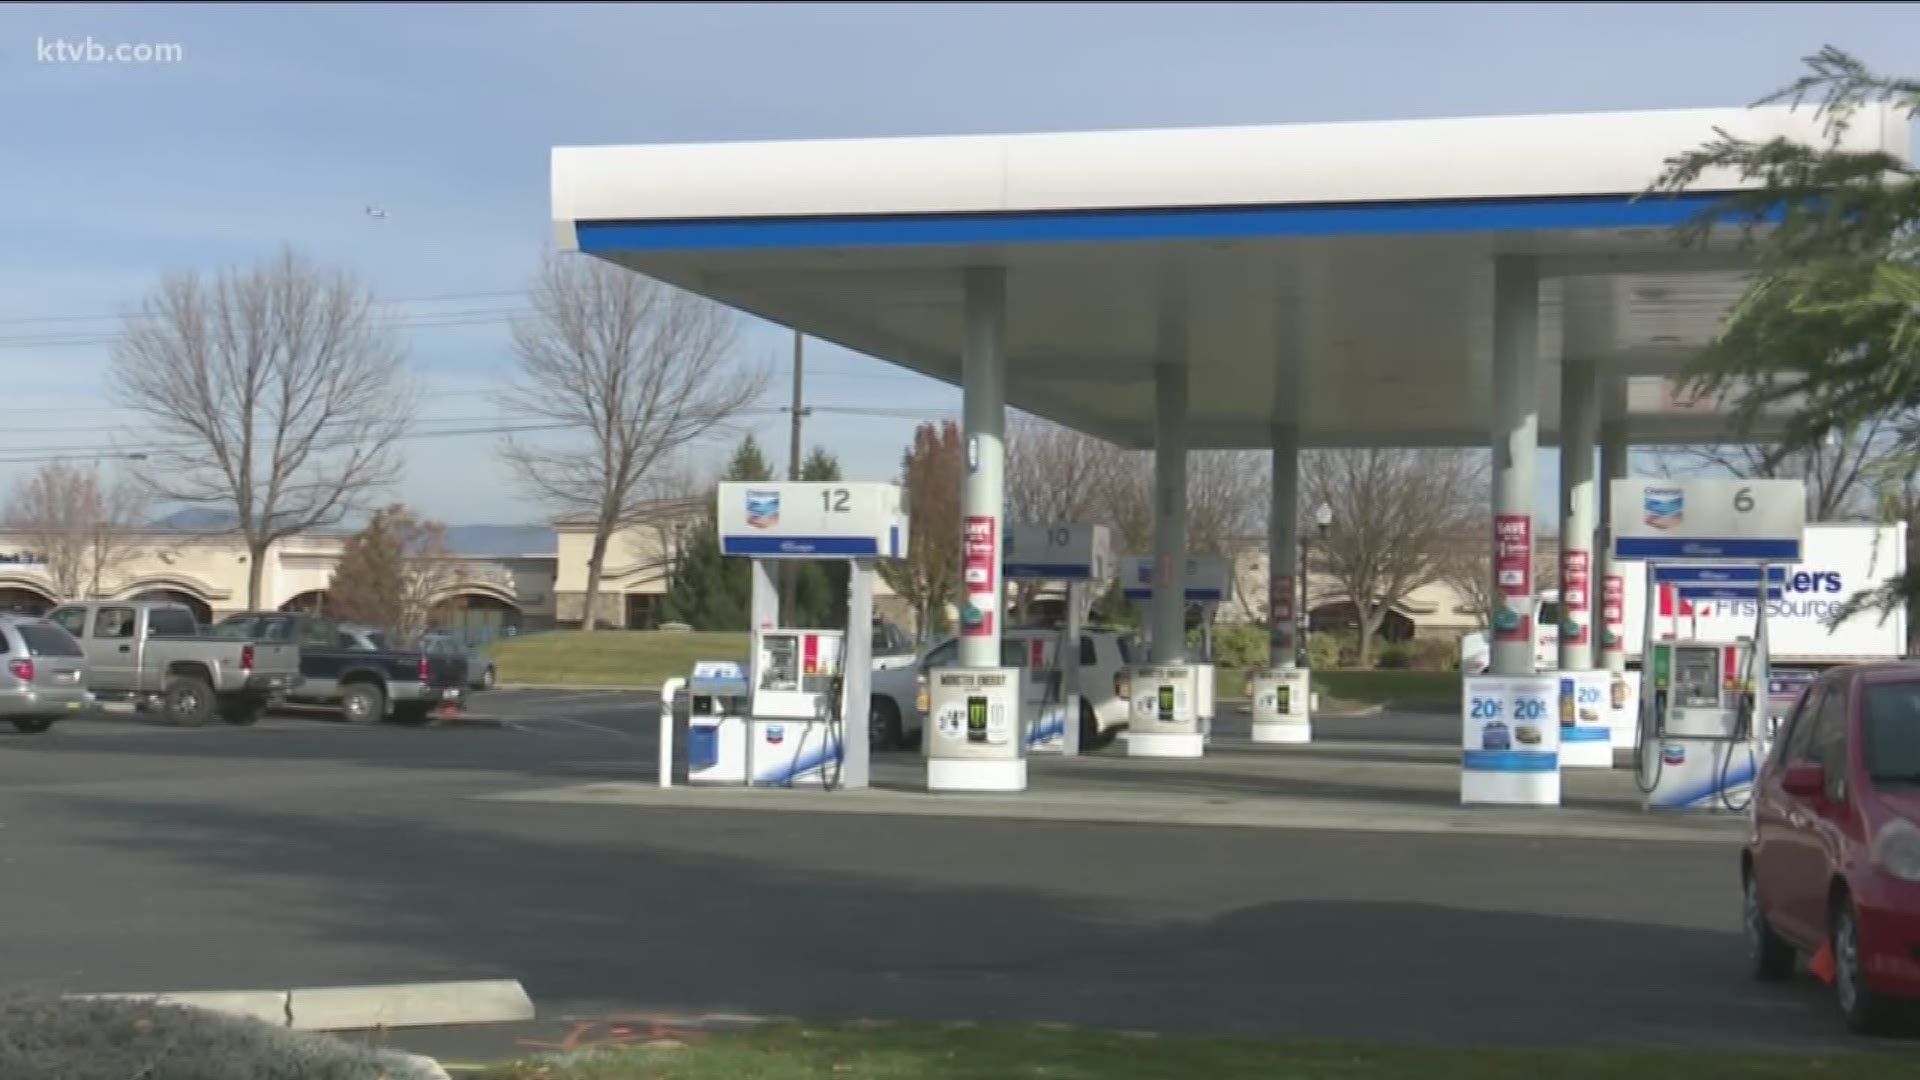 Police say the devices were likely at the gas pumps for months,